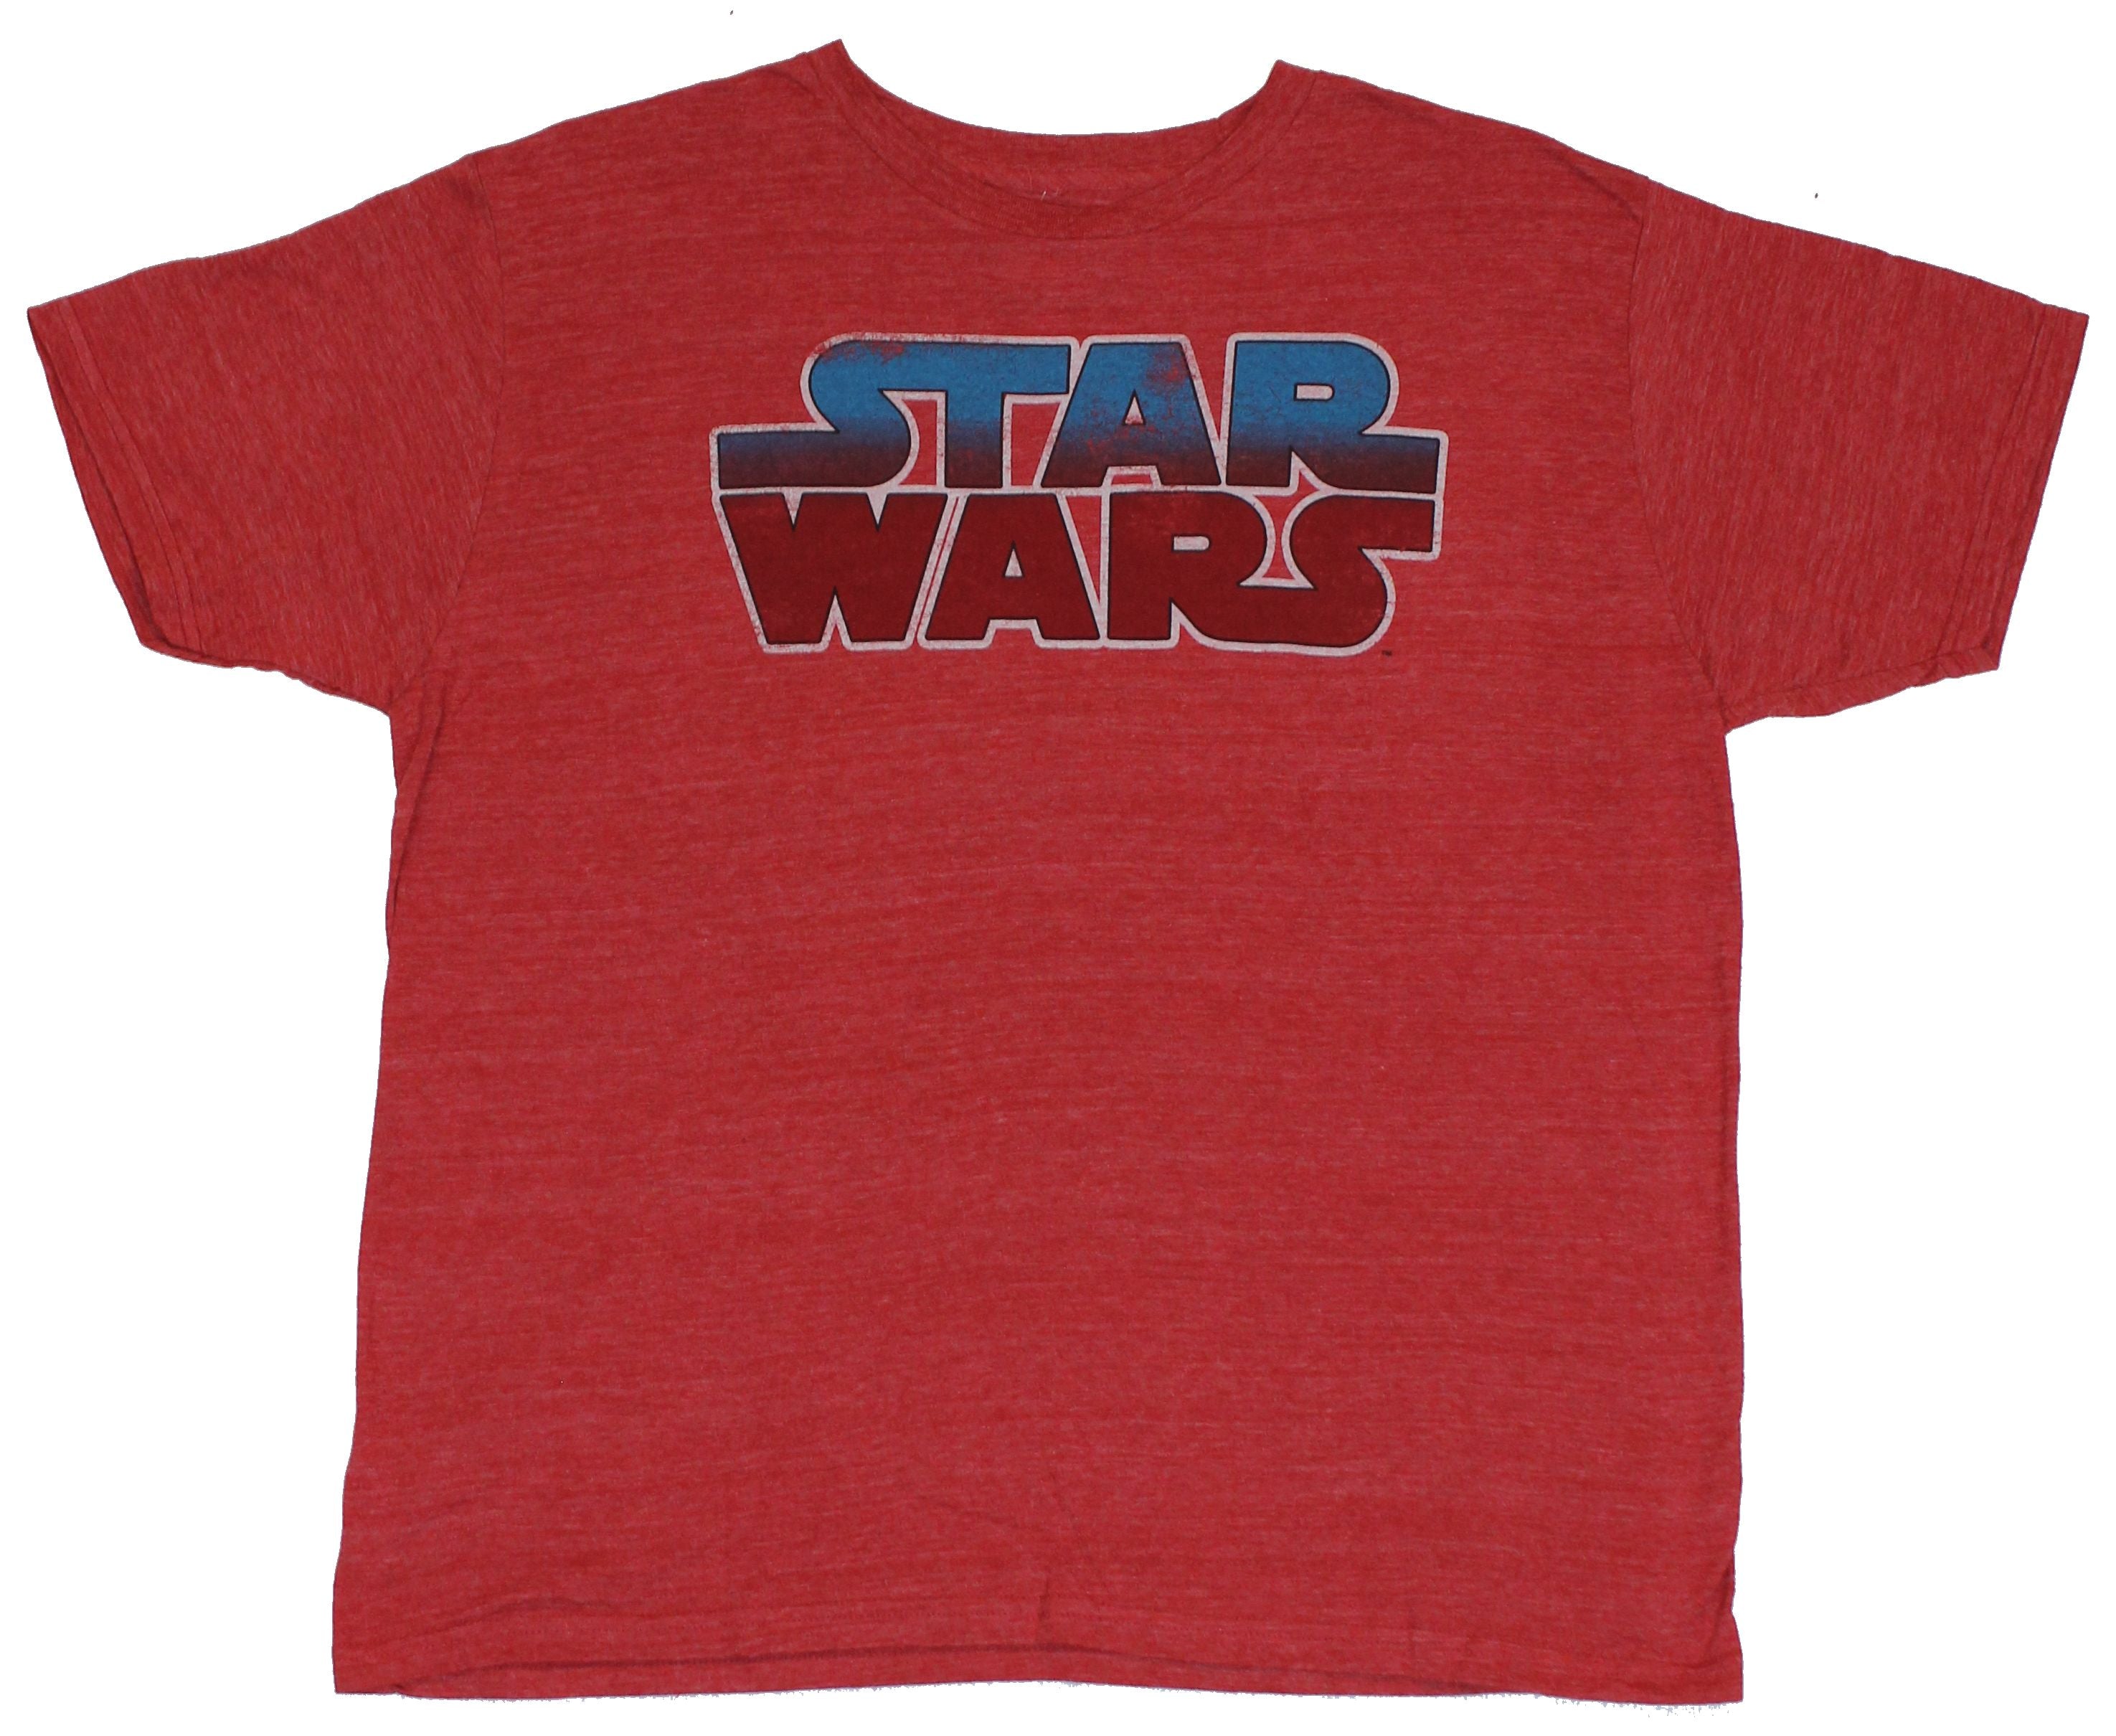 Star Wars Mens T-Shirt - Classic Distressed Red and Blue Title Fade Image